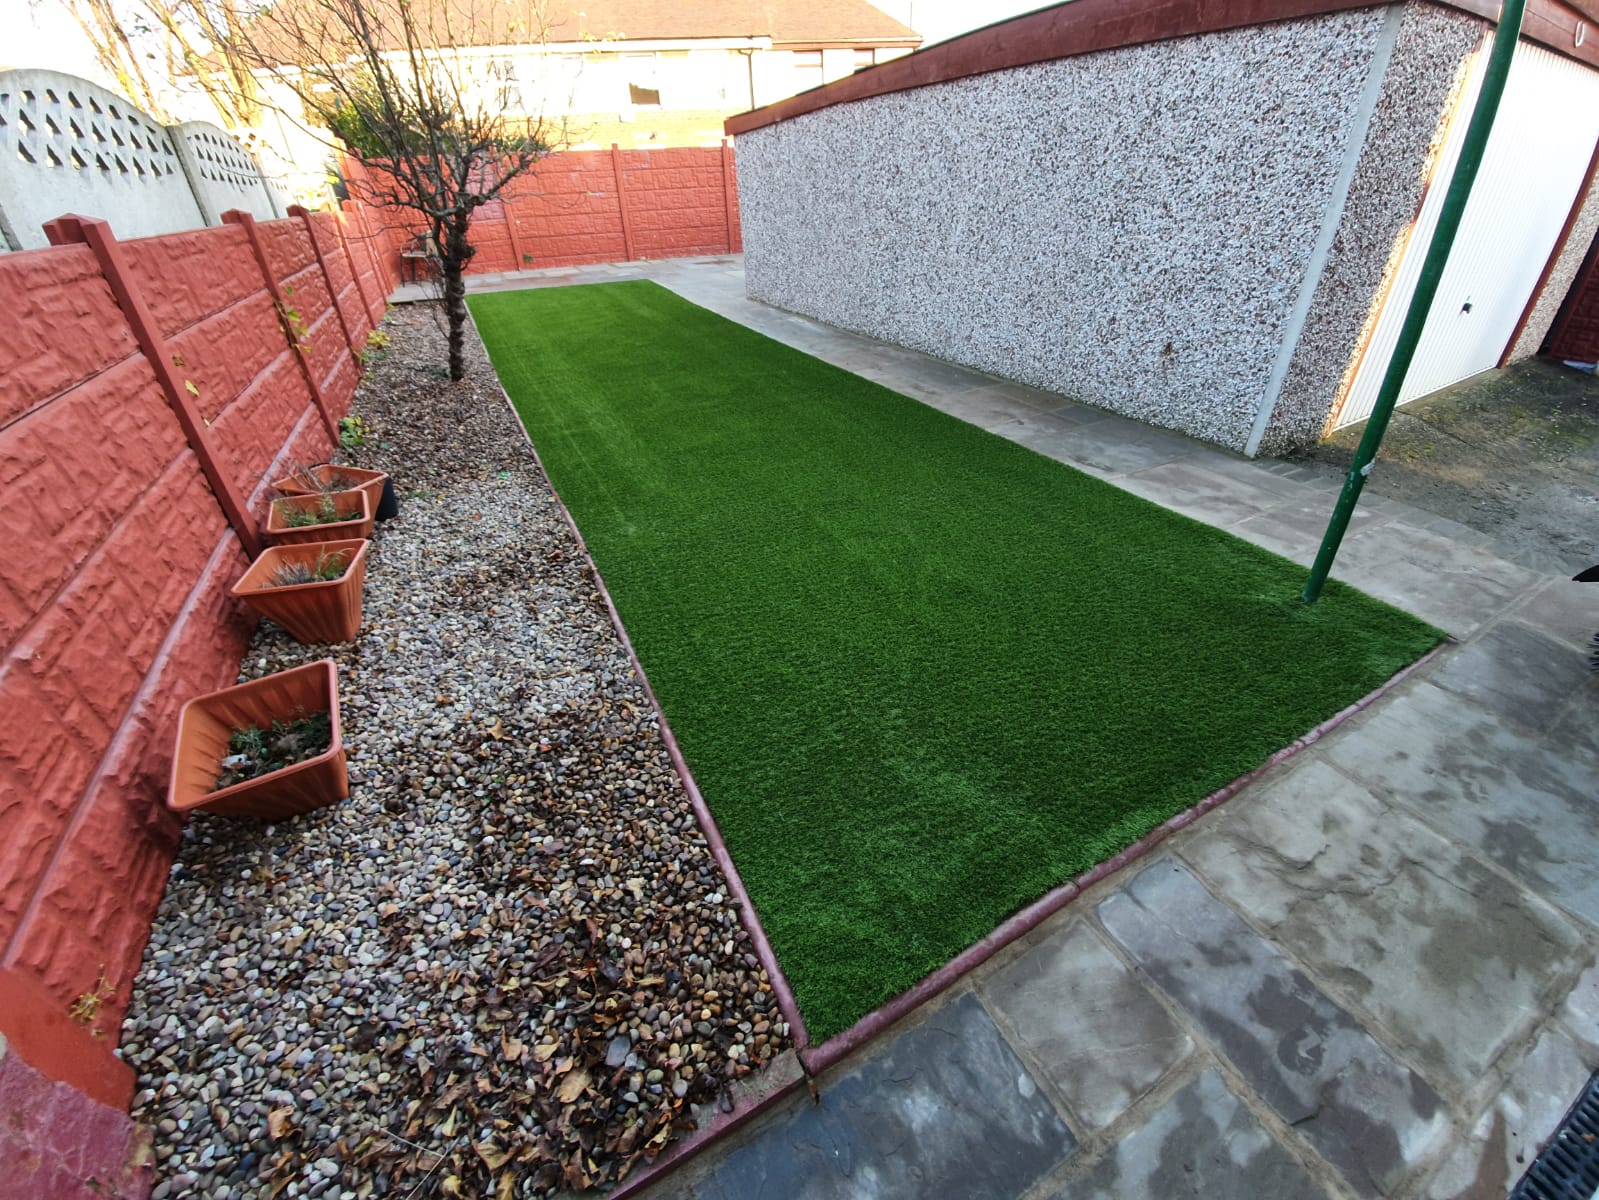 Completion of a 30m2 area of artificial grass in a Doncaster garden